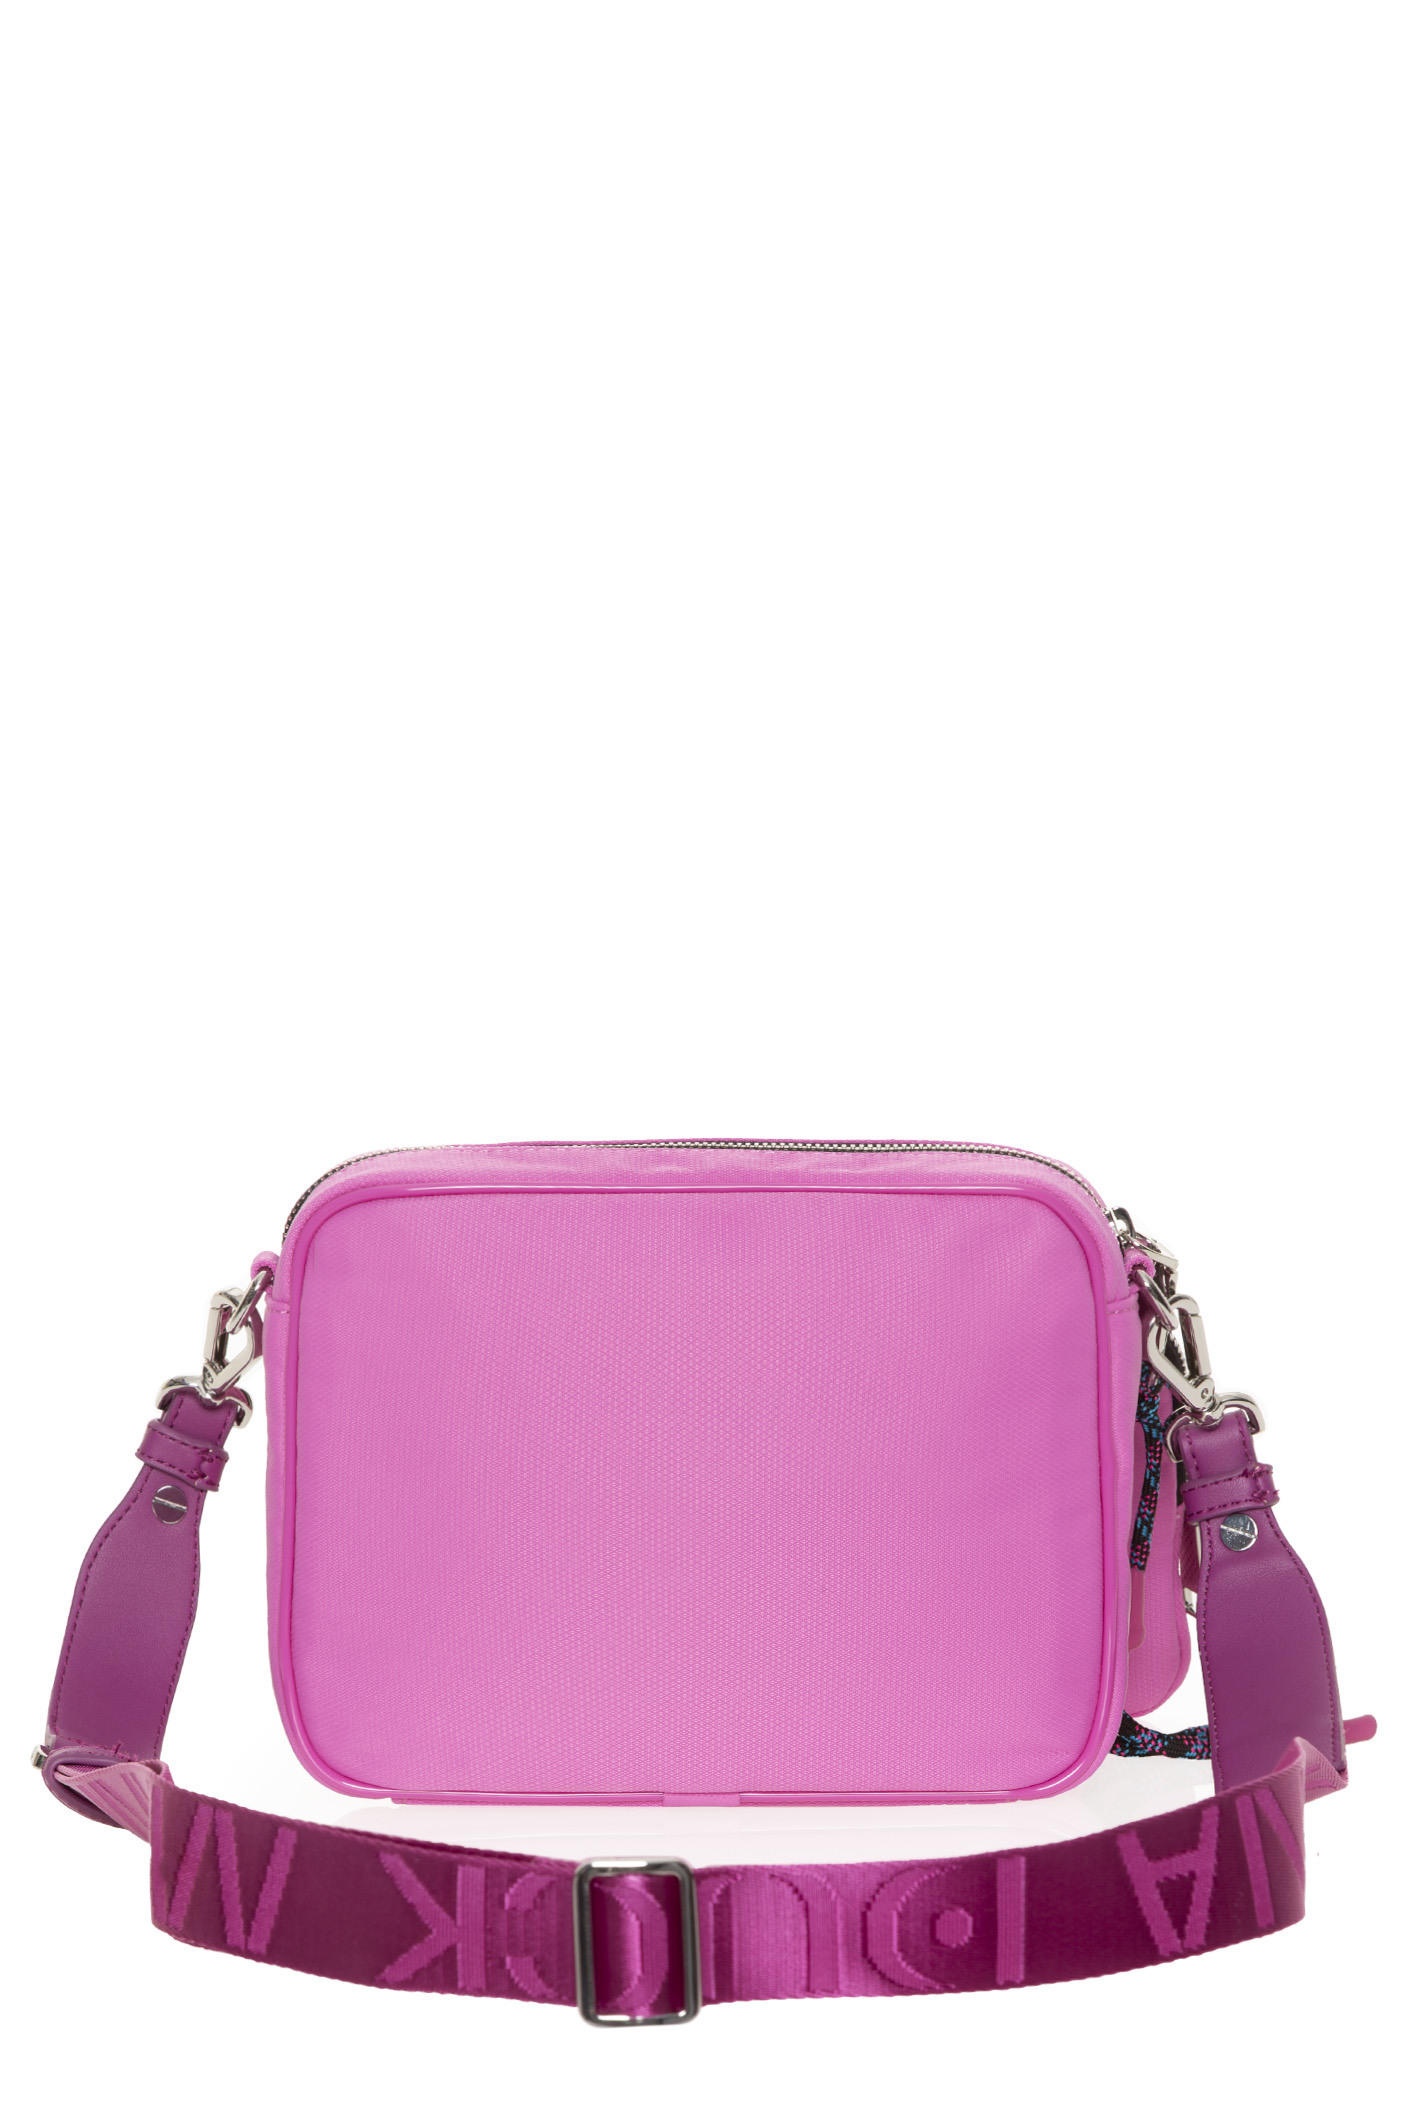 (image for) Borsa a tracolla F0816222-0264 mandarina duck md20 outlet